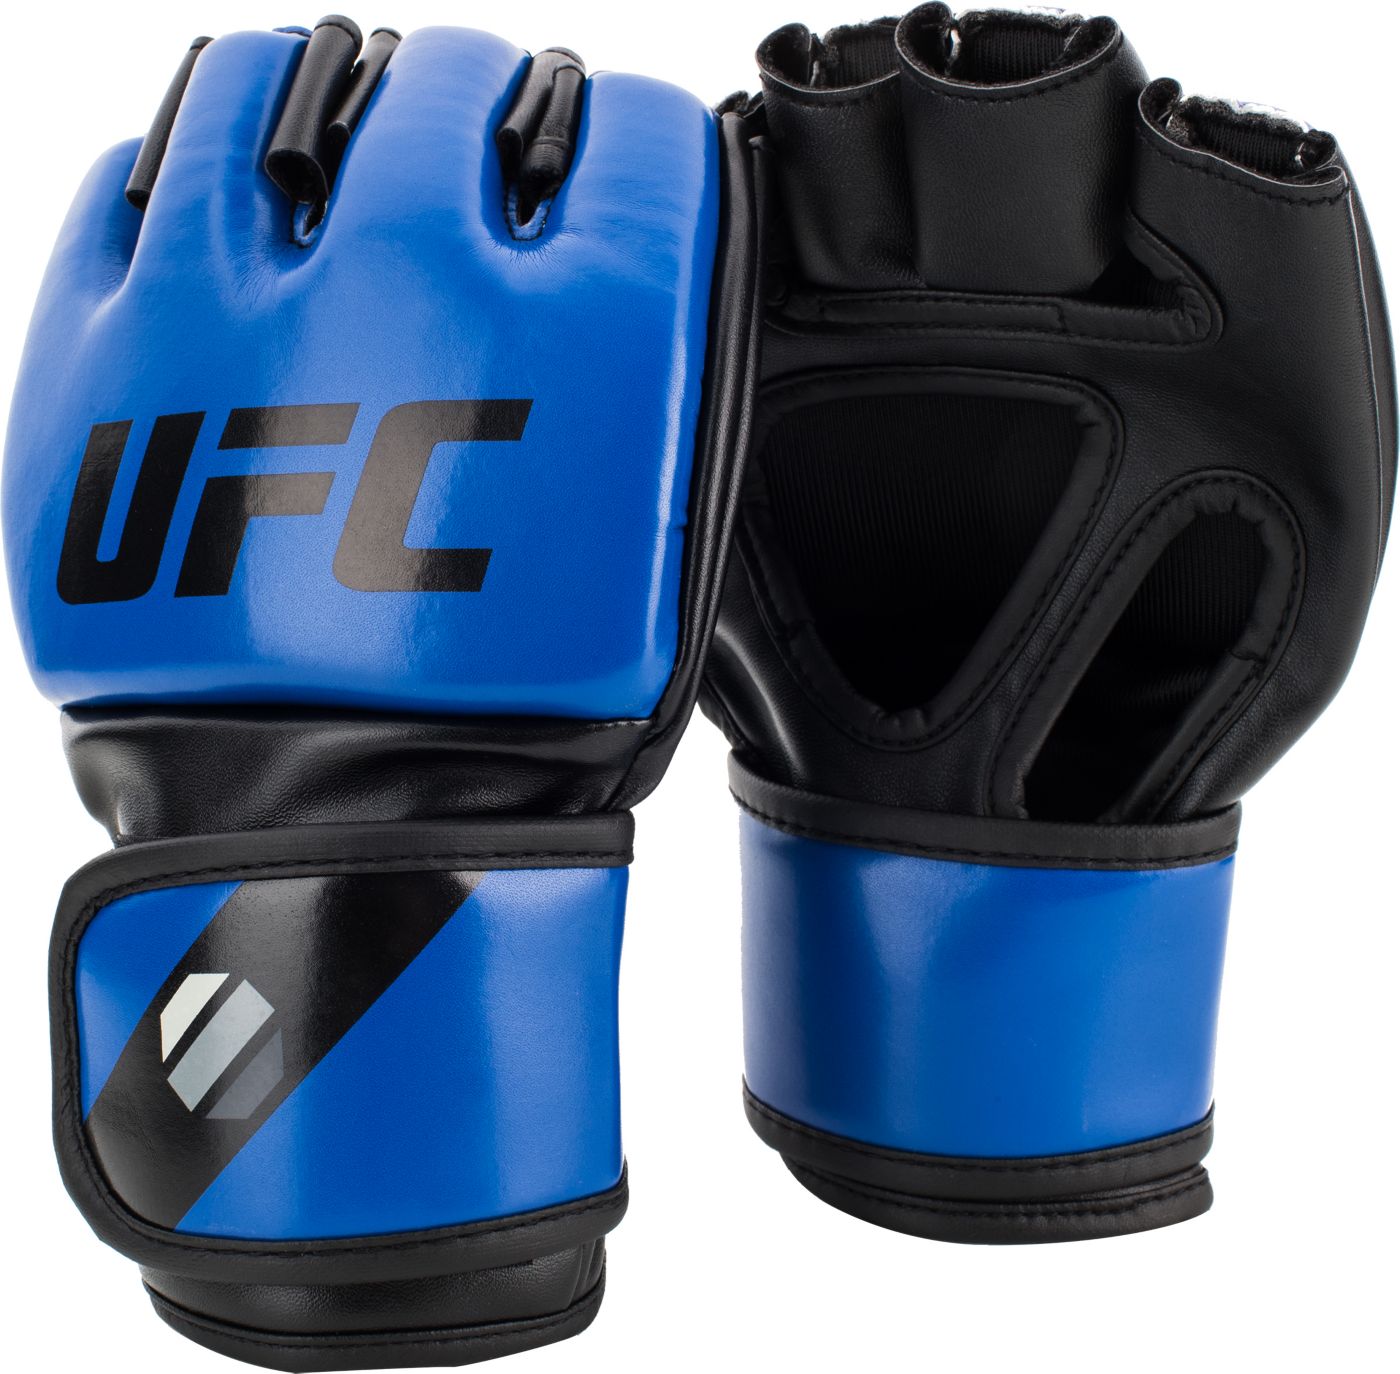 Download UFC 5 oz. MMA Gloves | DICK'S Sporting Goods